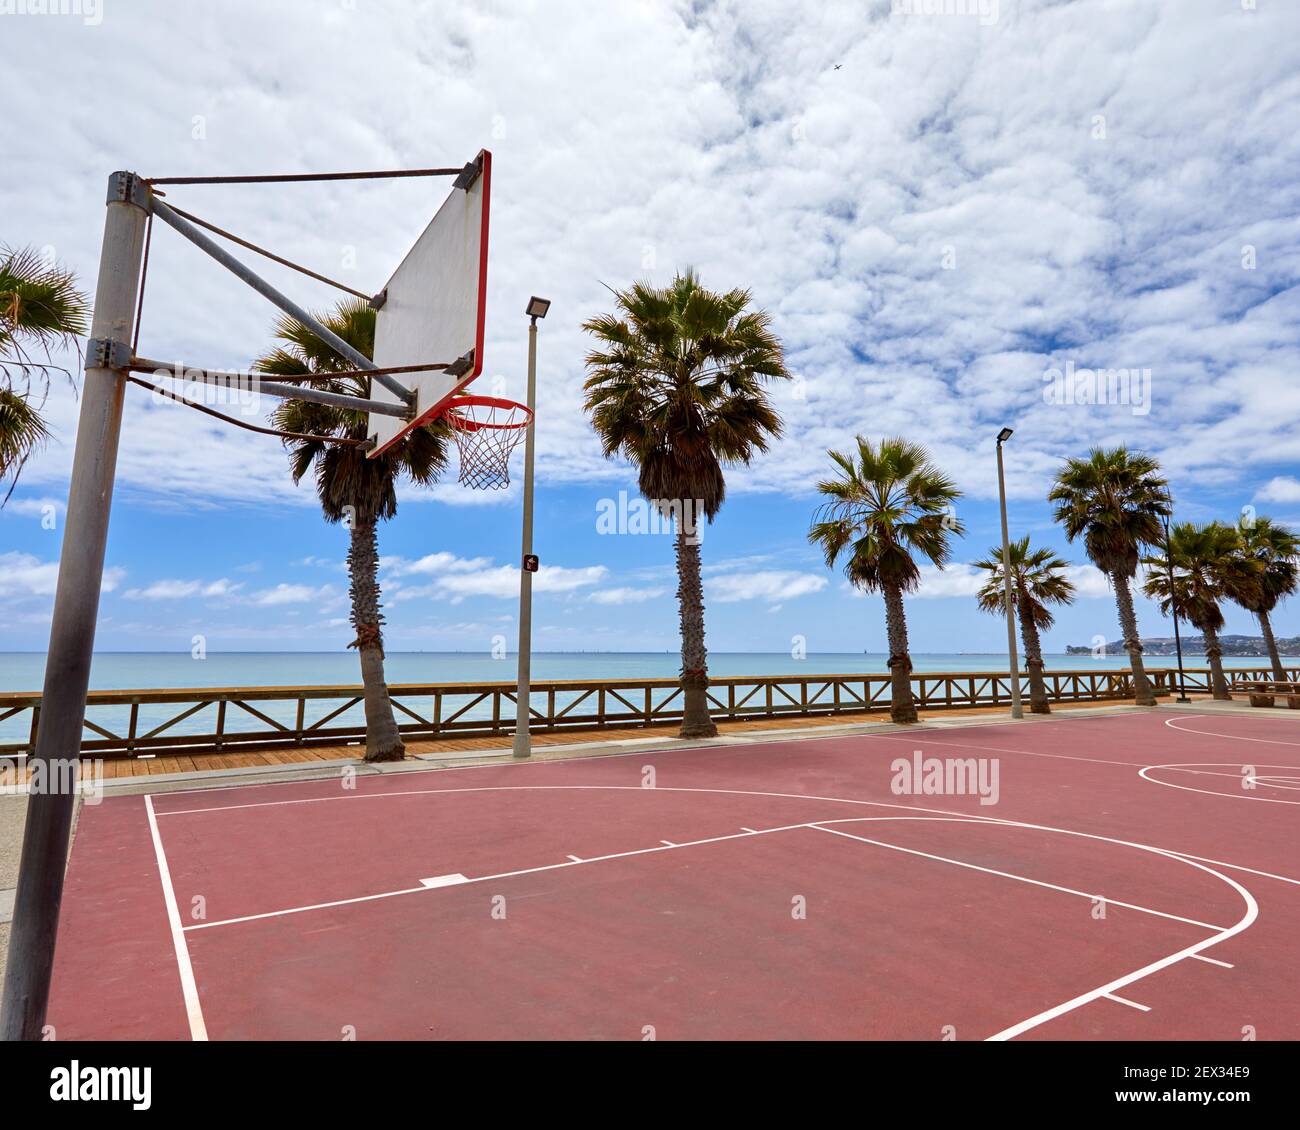 Outdoor street basketball court on beach in San Clemente California with orange surface and palm trees in the background showing hoop and backboard Stock Photo